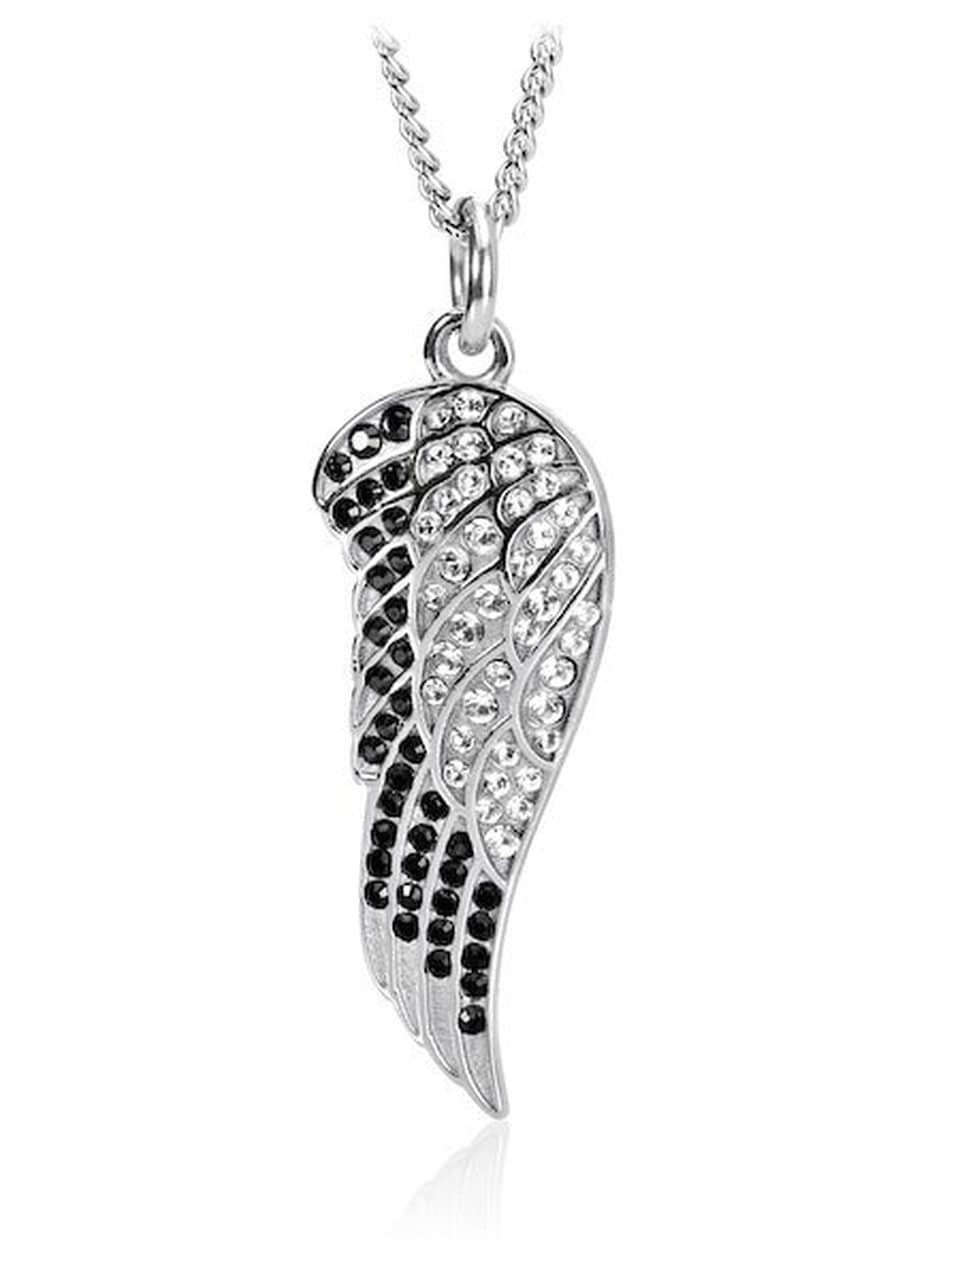 Women's Angel Wing Necklace With Swarovski Crystals